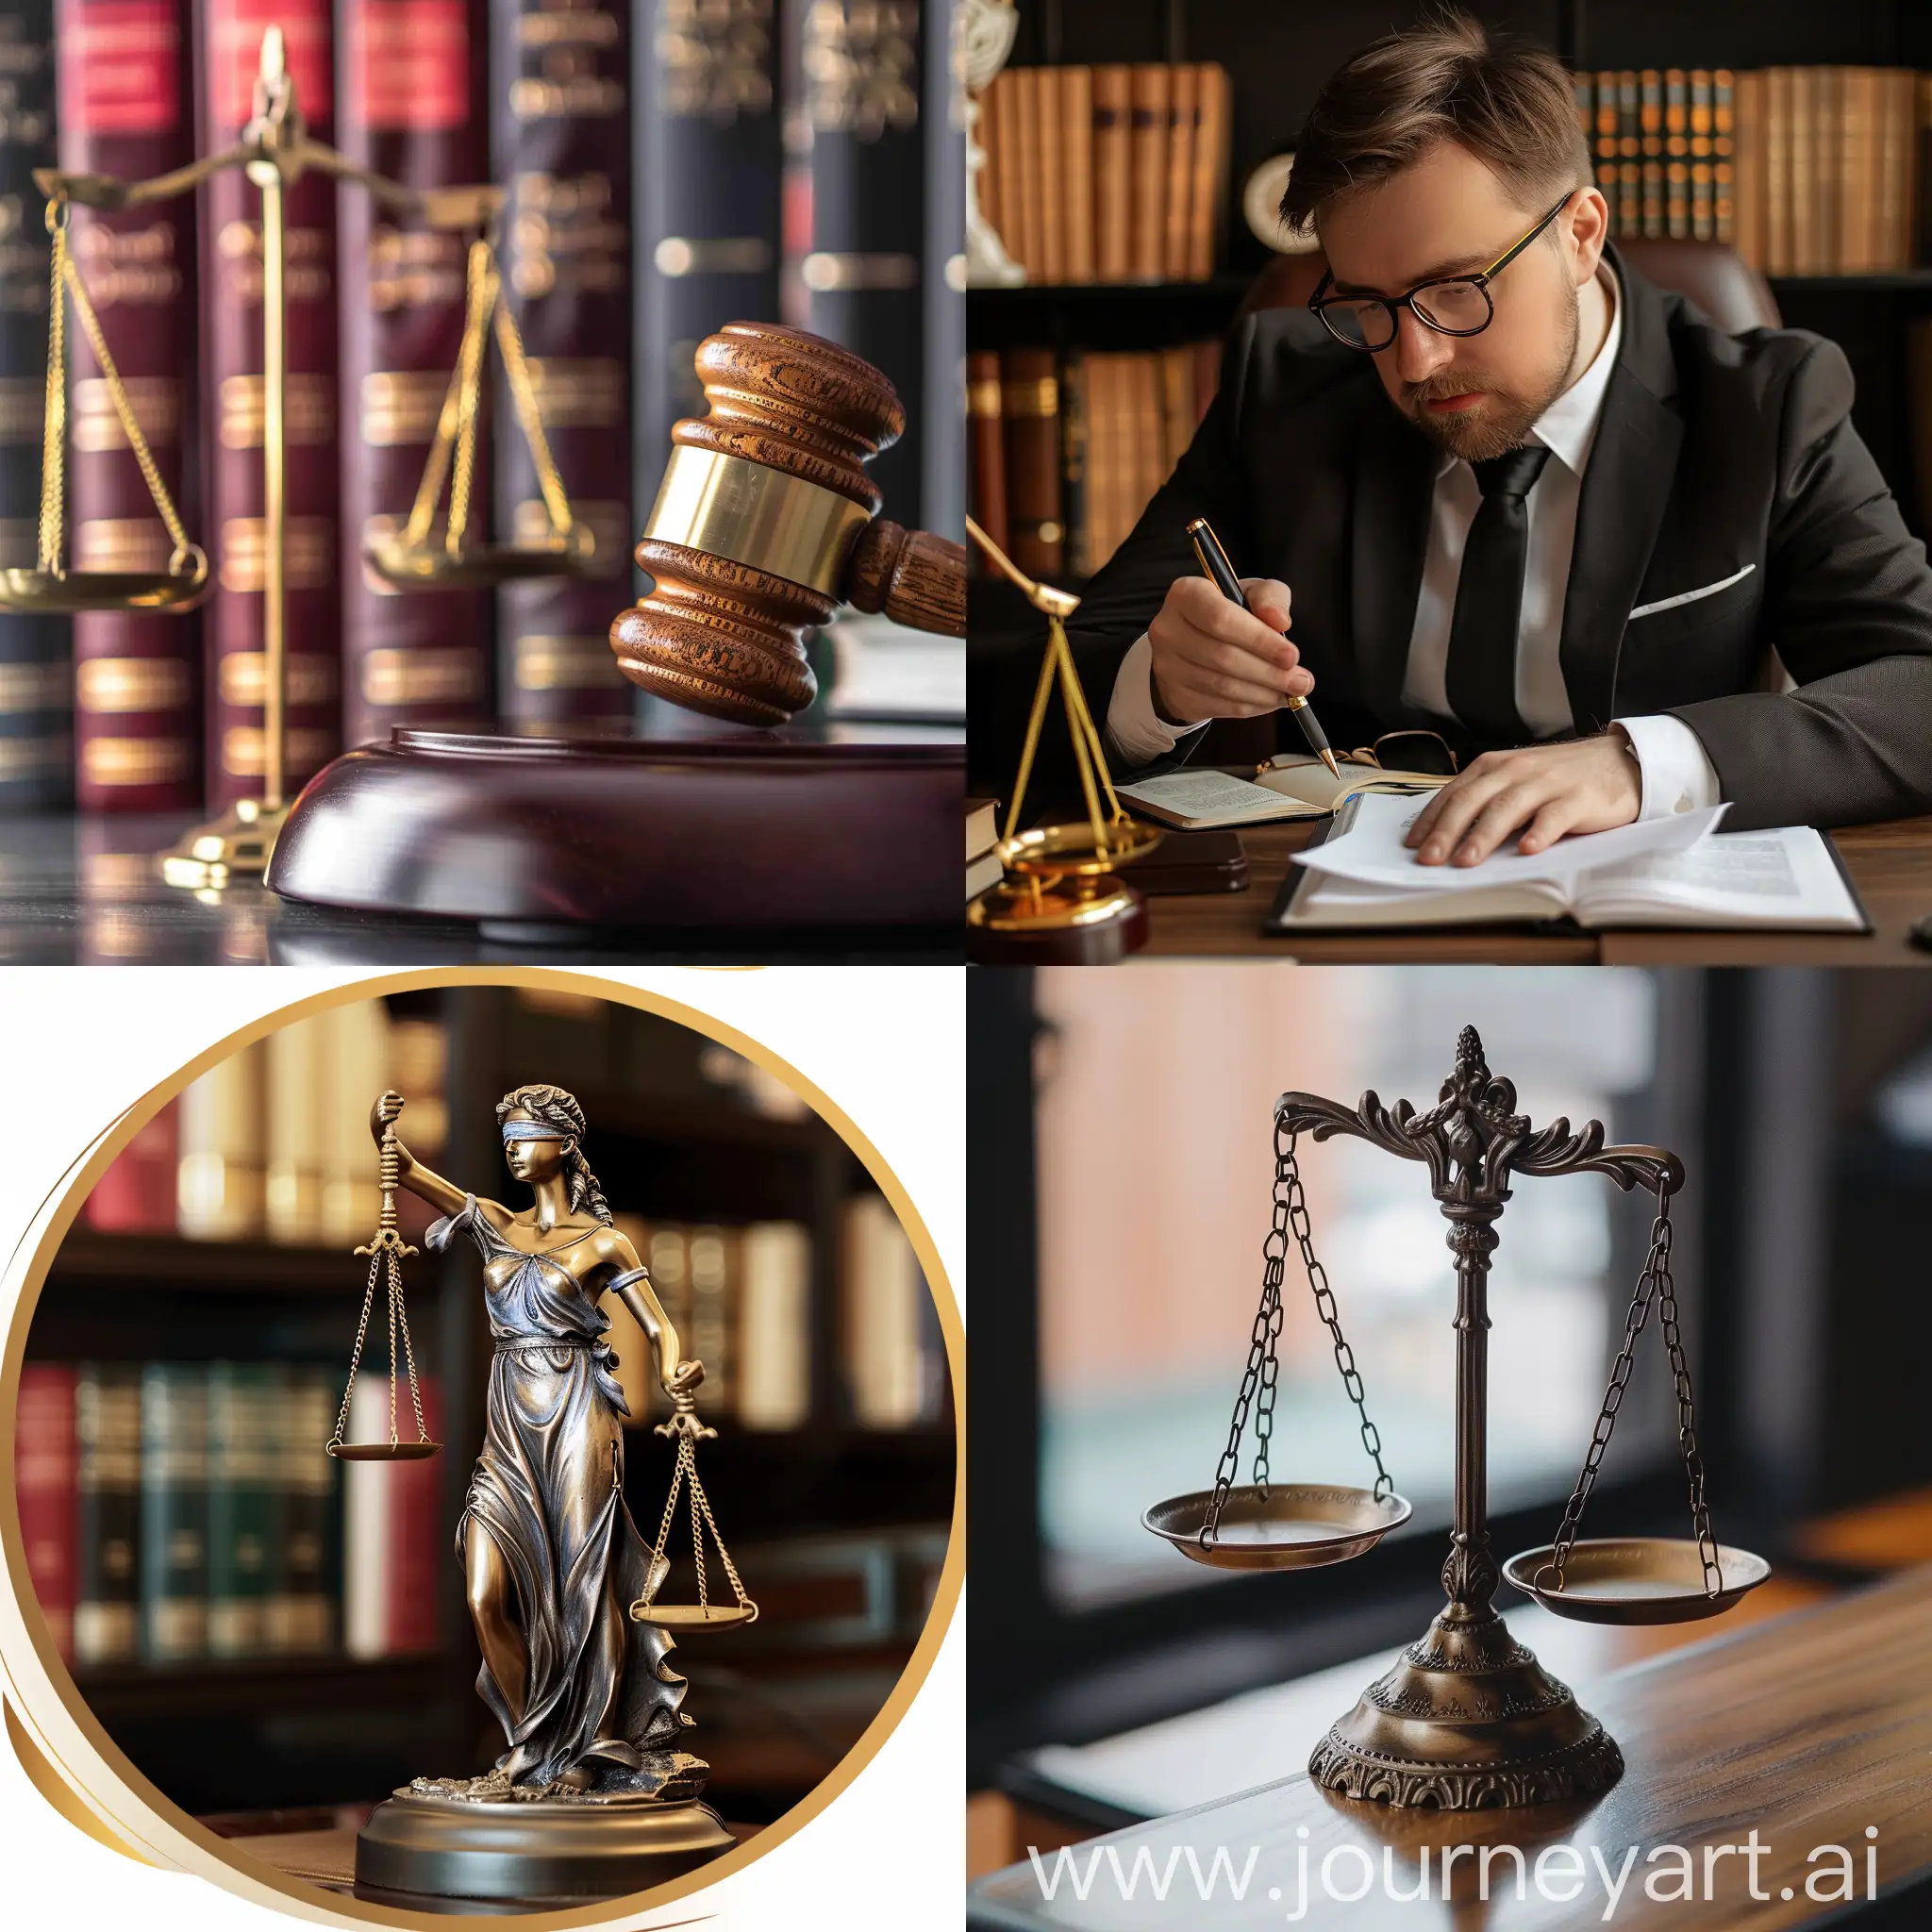 website for legal services